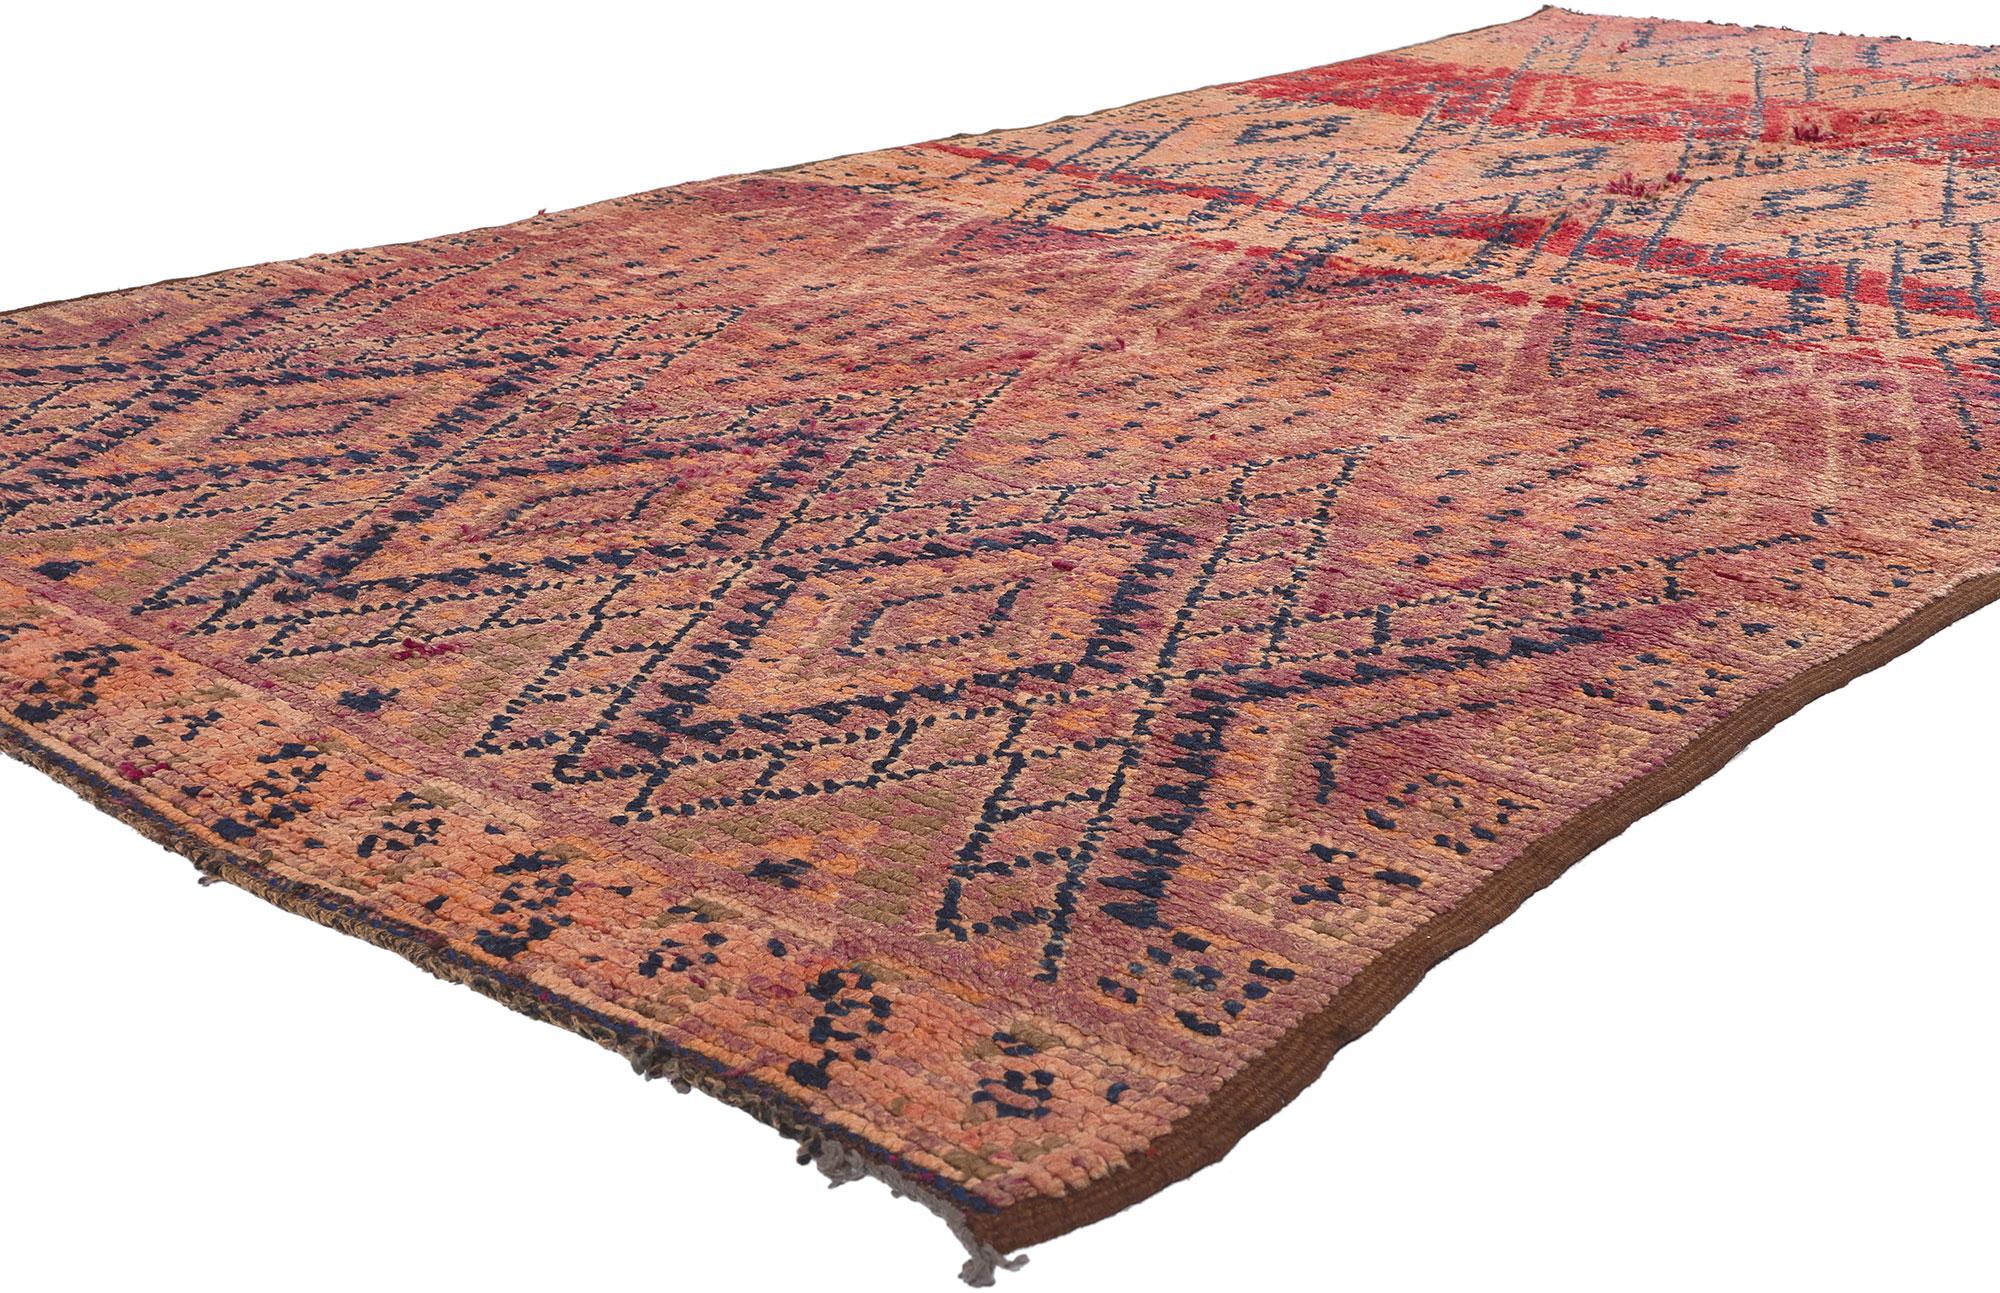 21346 Vintage Beni MGuild Moroccan Rug, 05'04 x 10'01. Woven with the enchanting expertise of Berber women from the Ait M'Guild tribe in the mystical Atlas Mountains of Morocco, Beni Mguild rugs are revered for their masterful craftsmanship and